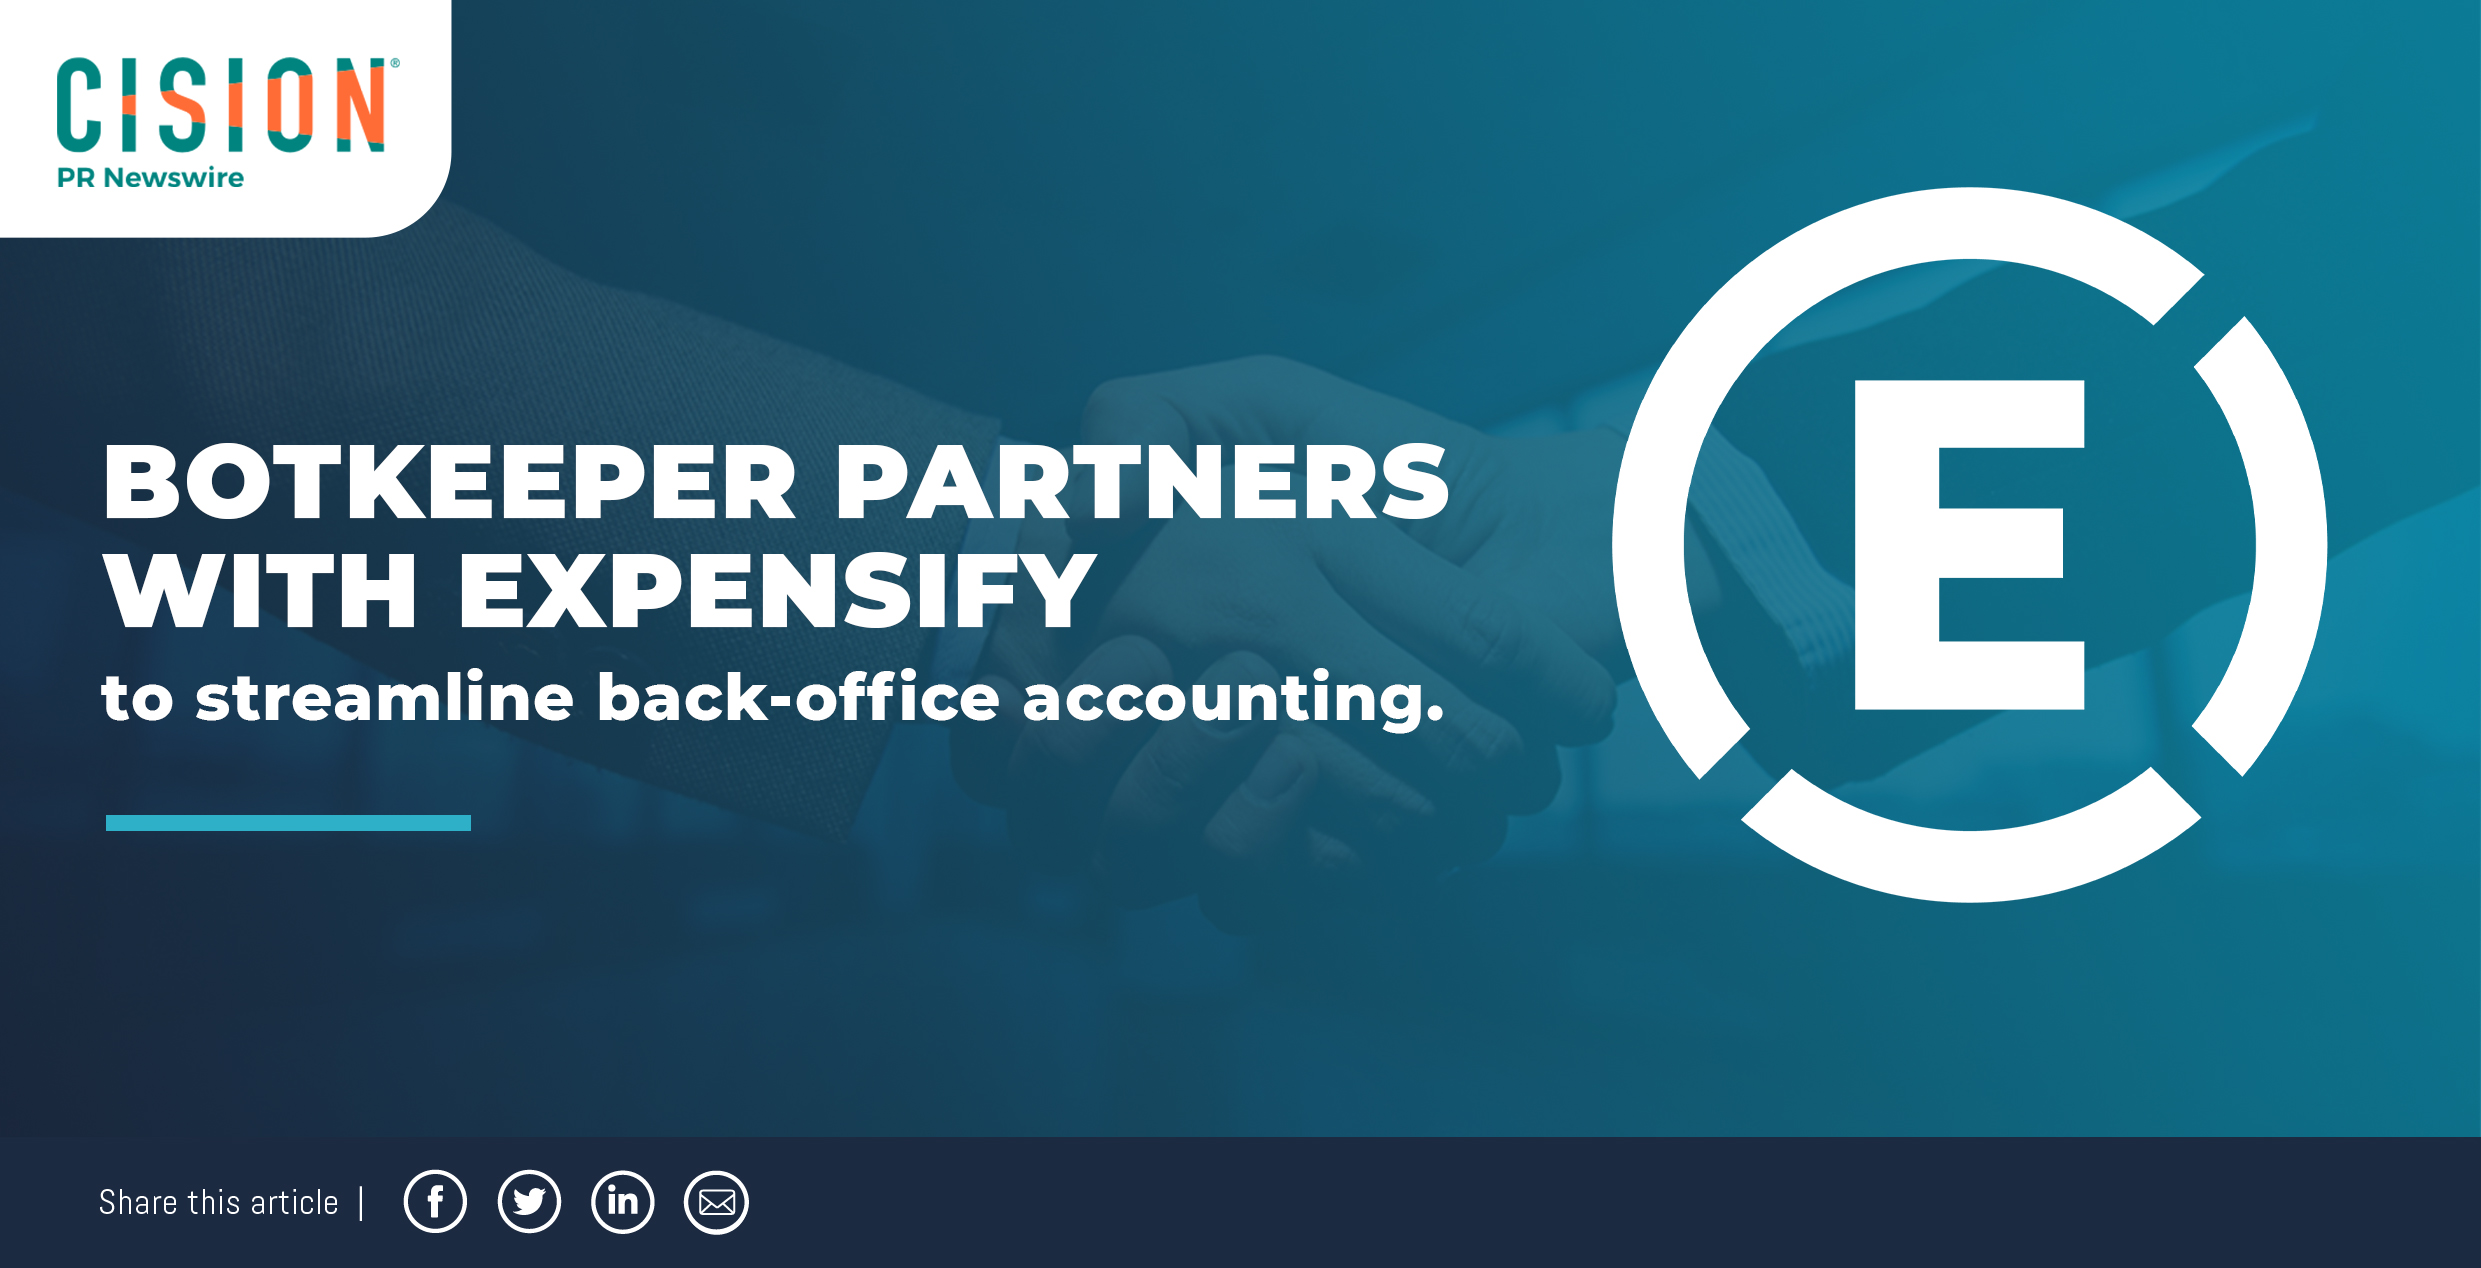 PR-Botkeeper-Botkeeper-Partners-with-Expensify